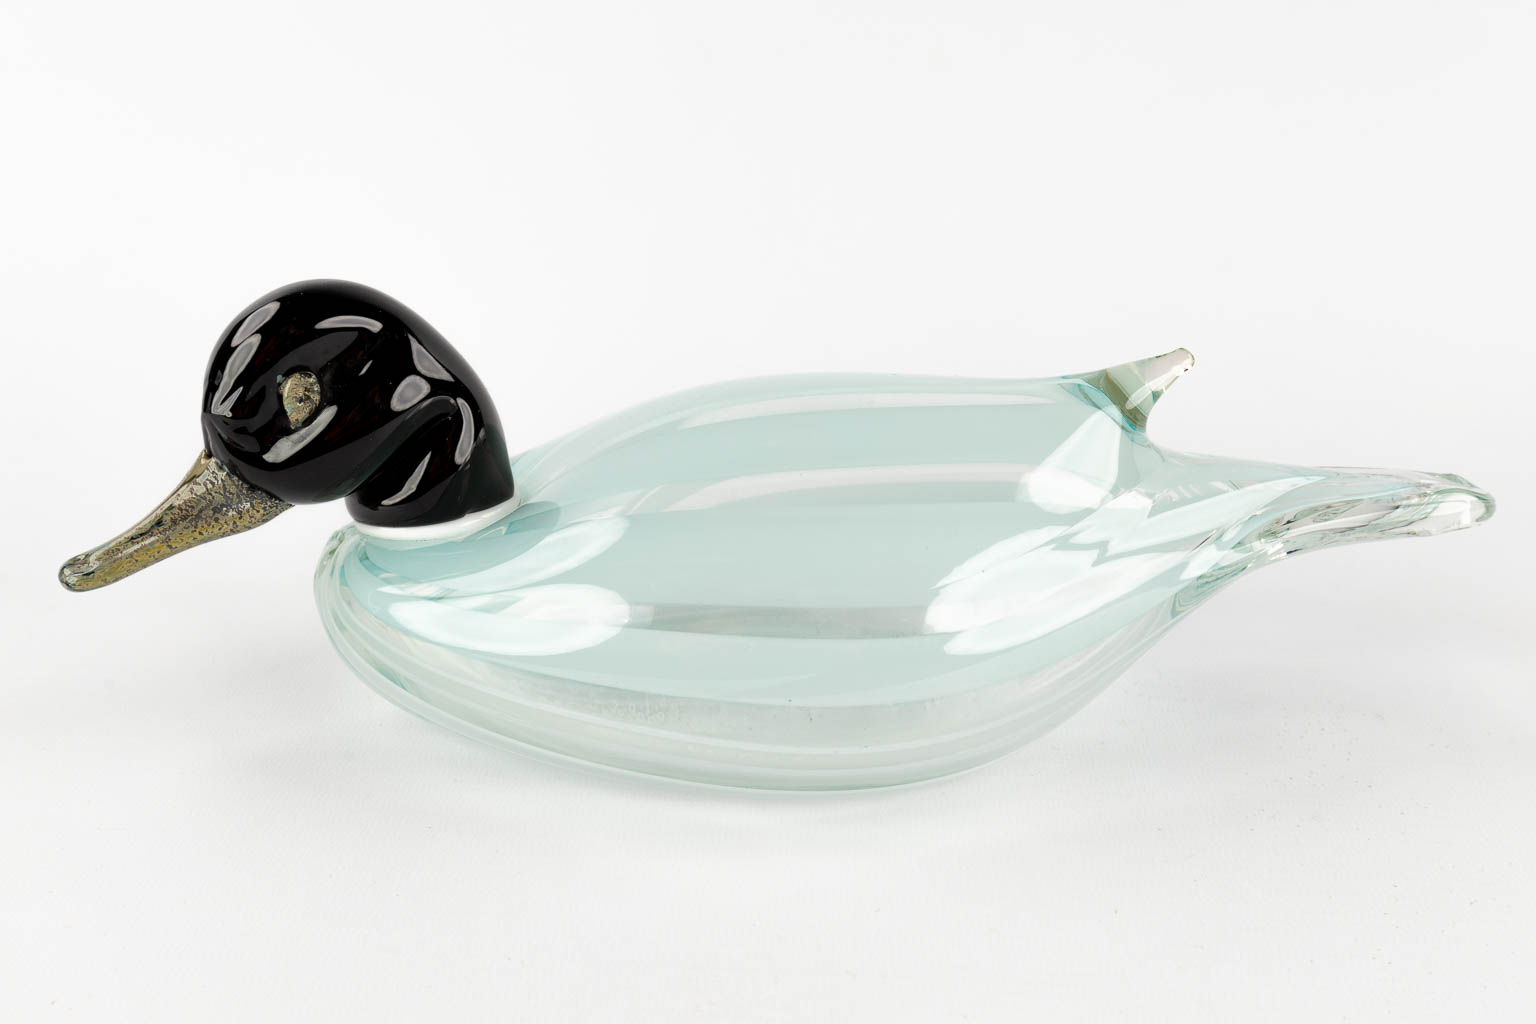 Two ducks, glass, Murano, Italy. Cenedese. (D:12 x W:30 x H:10 cm)